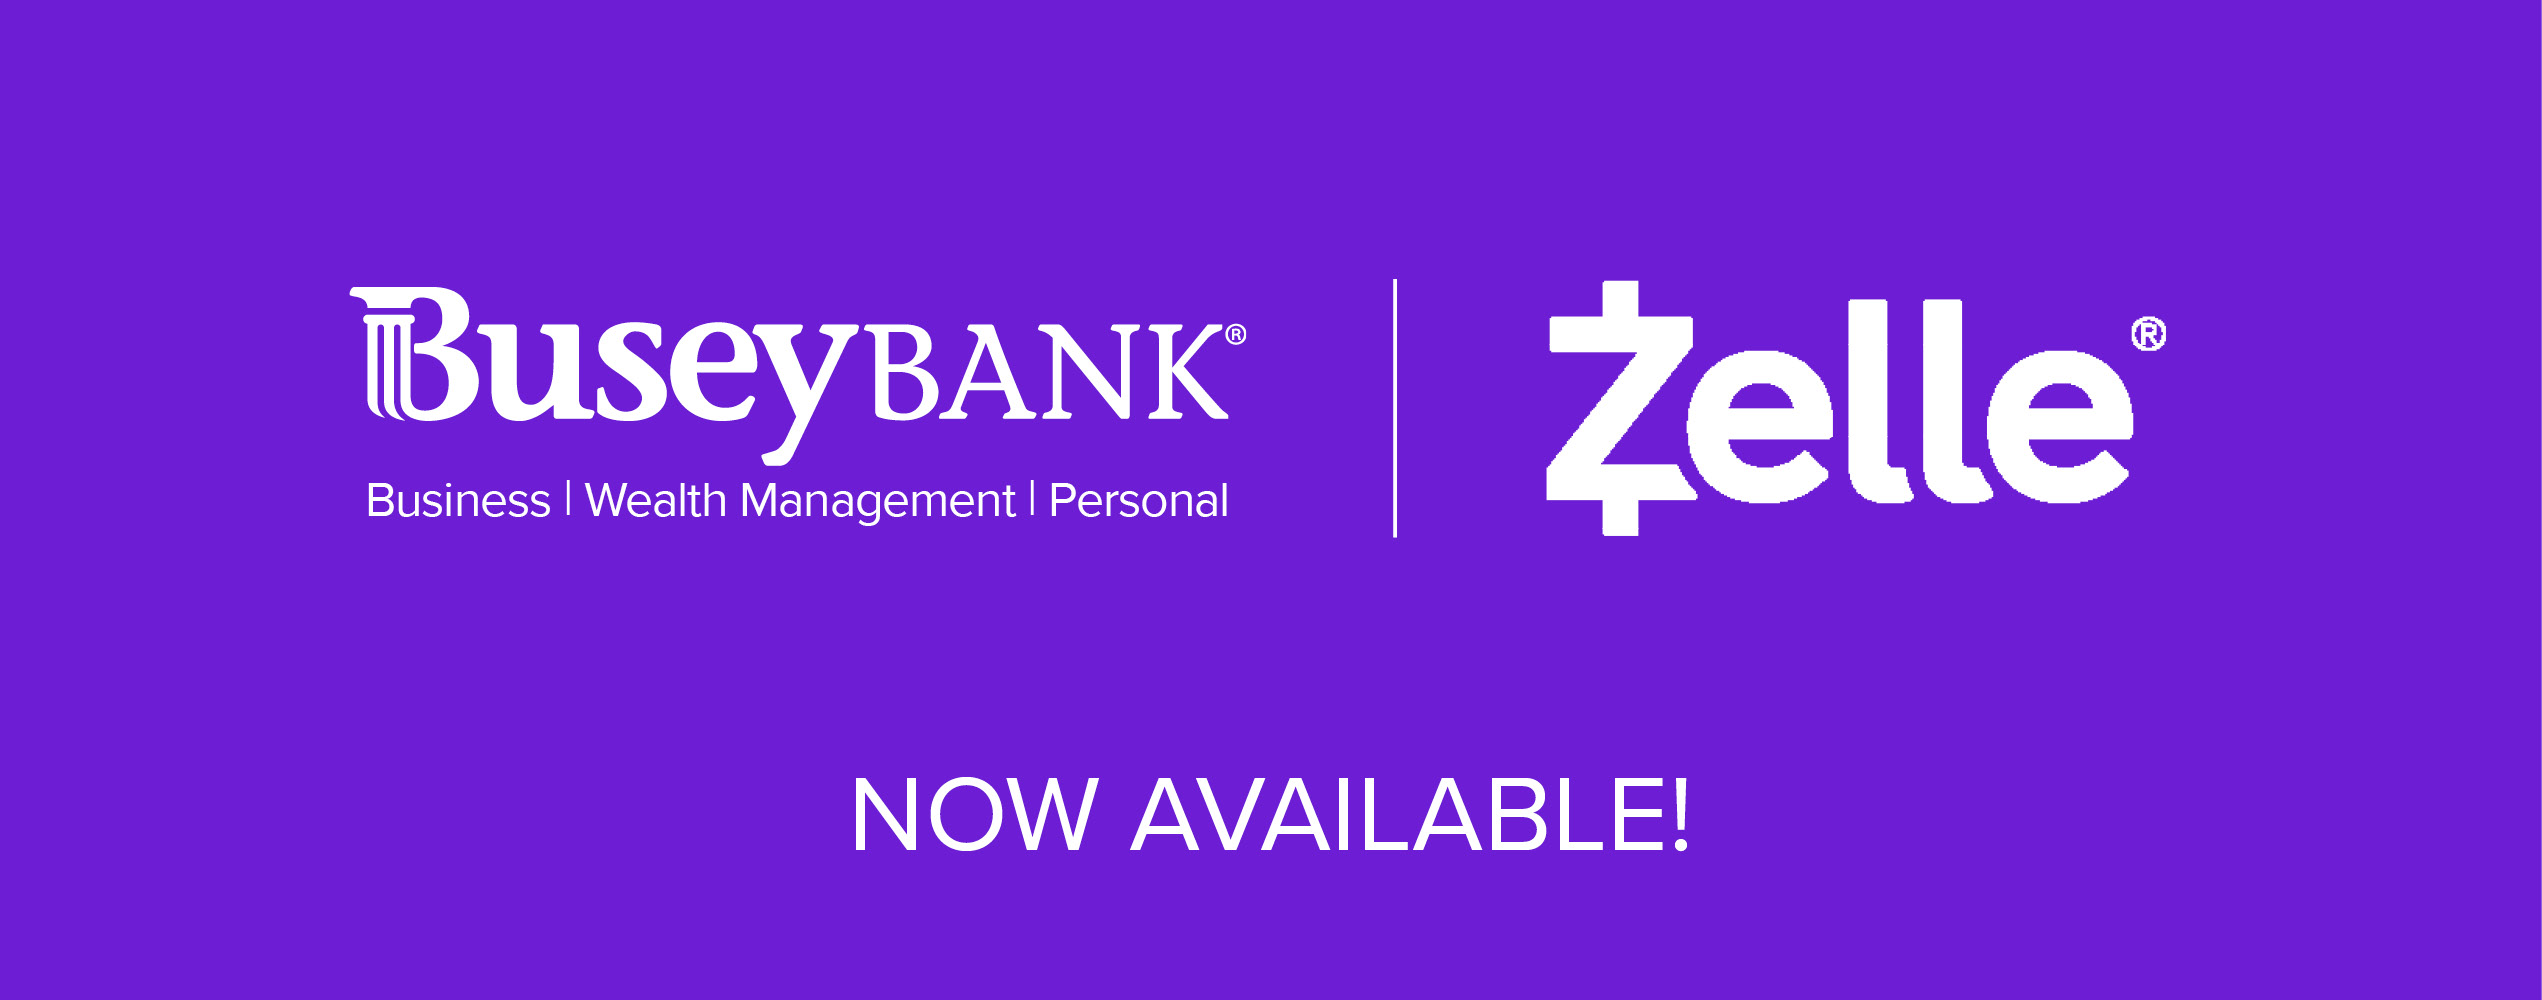 Zelle is Now Available with Busey Bank